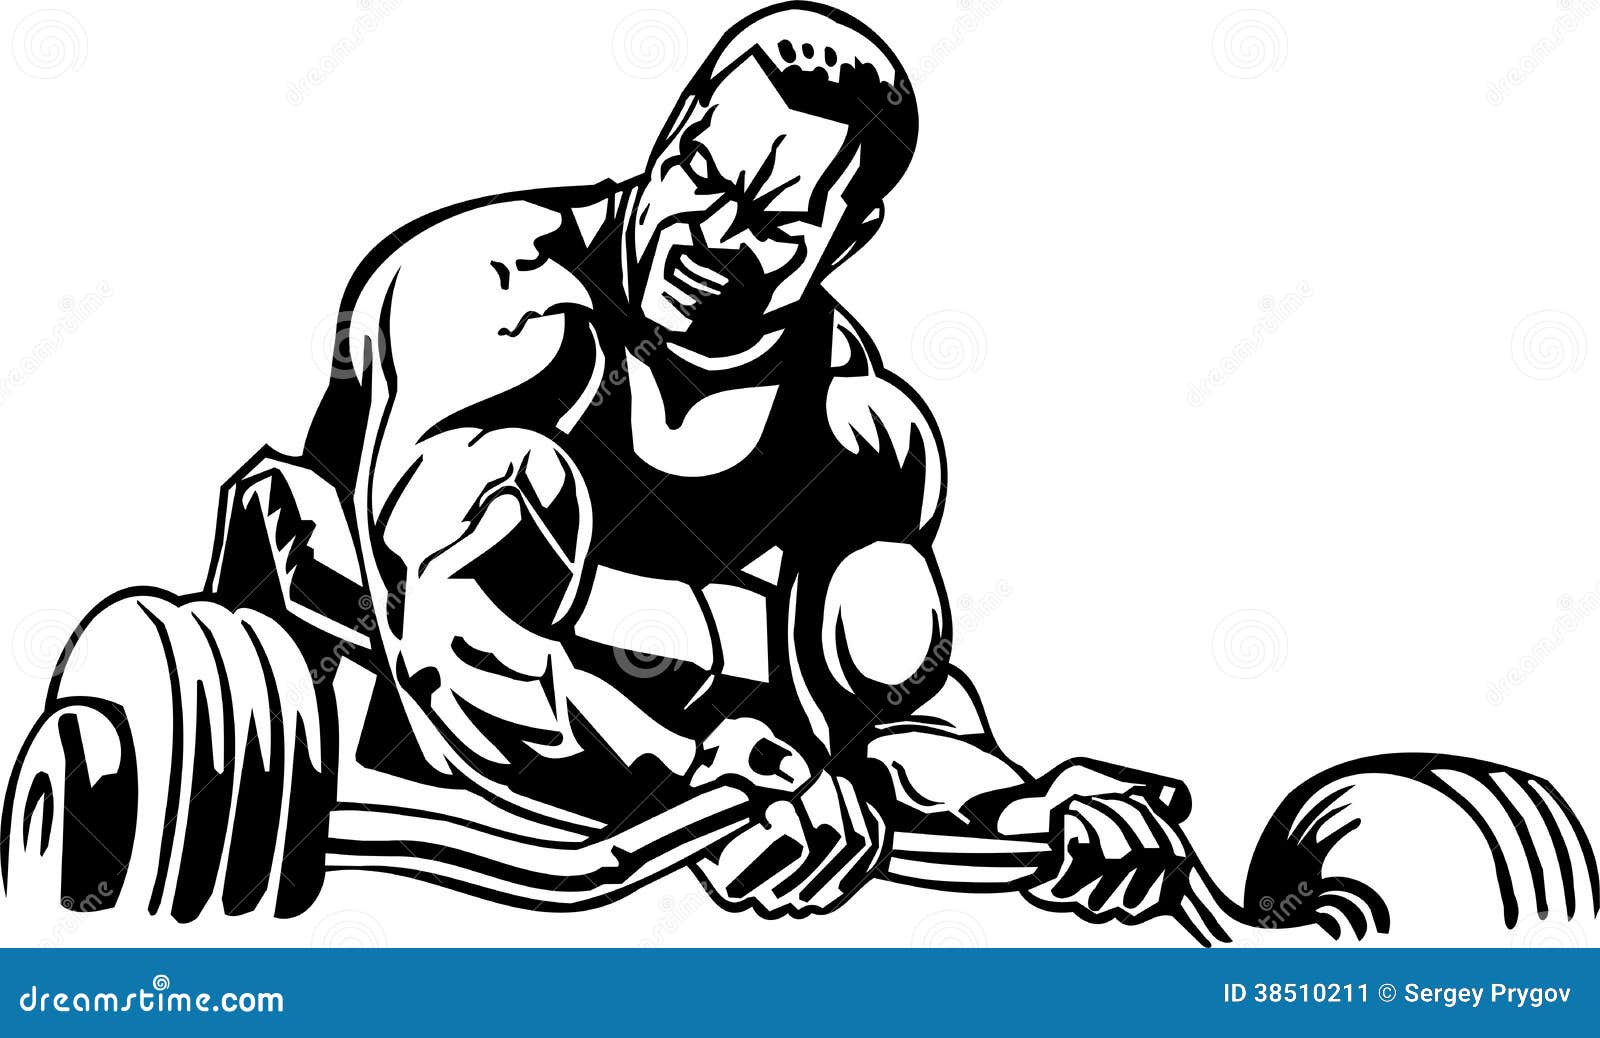 clipart powerlifting - photo #50